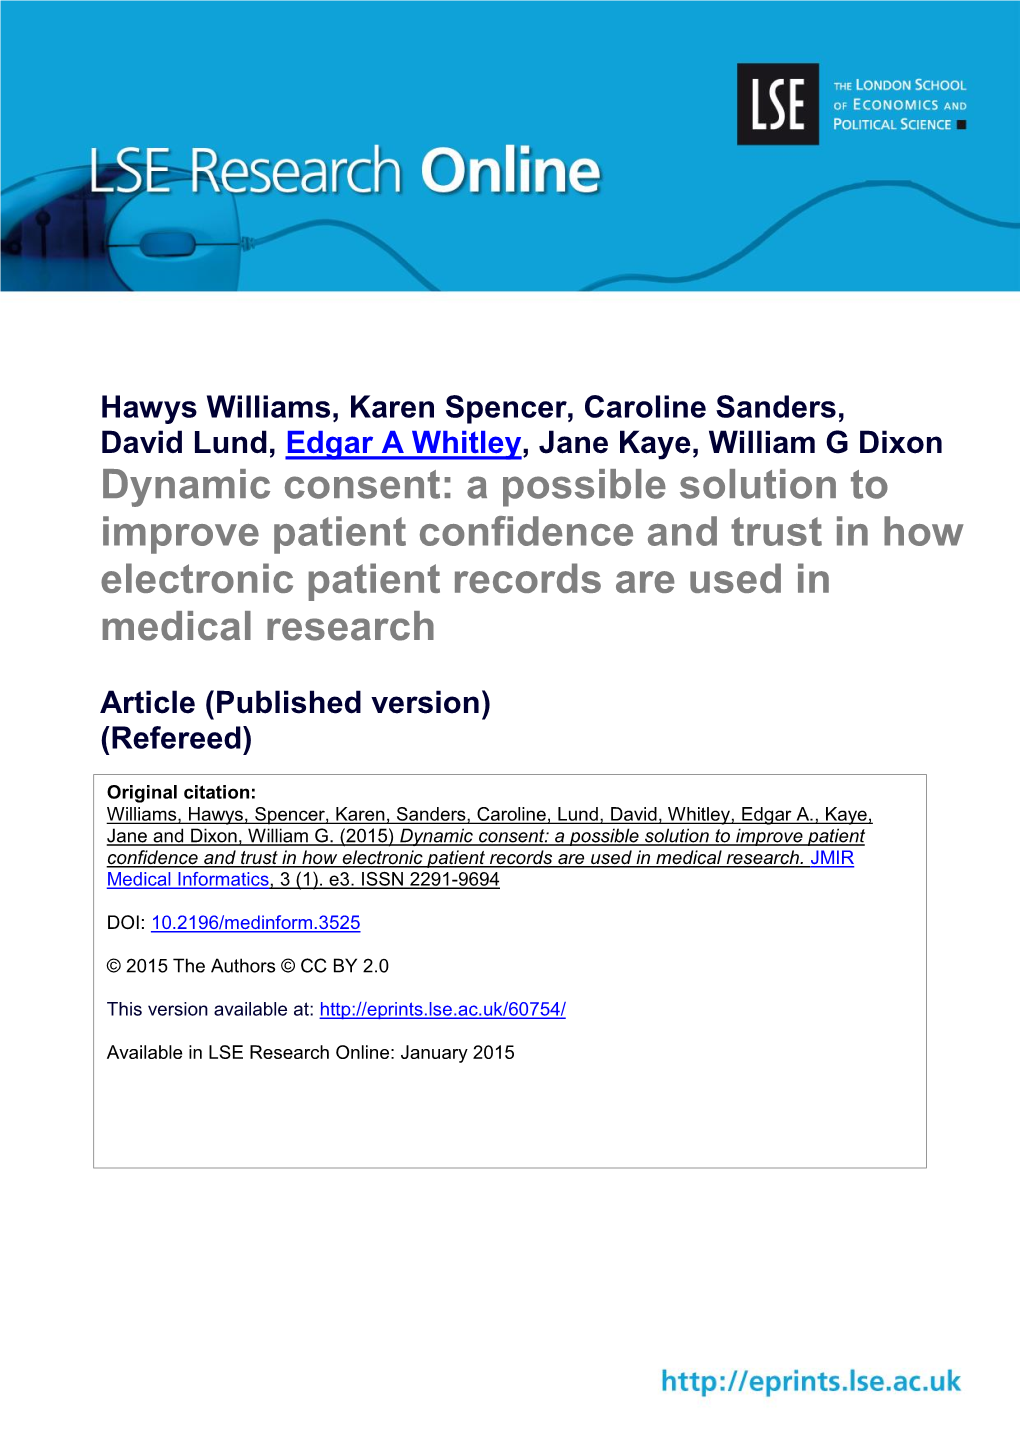 Dynamic Consent: a Possible Solution to Improve Patient Confidence and Trust in How Electronic Patient Records Are Used in Medical Research